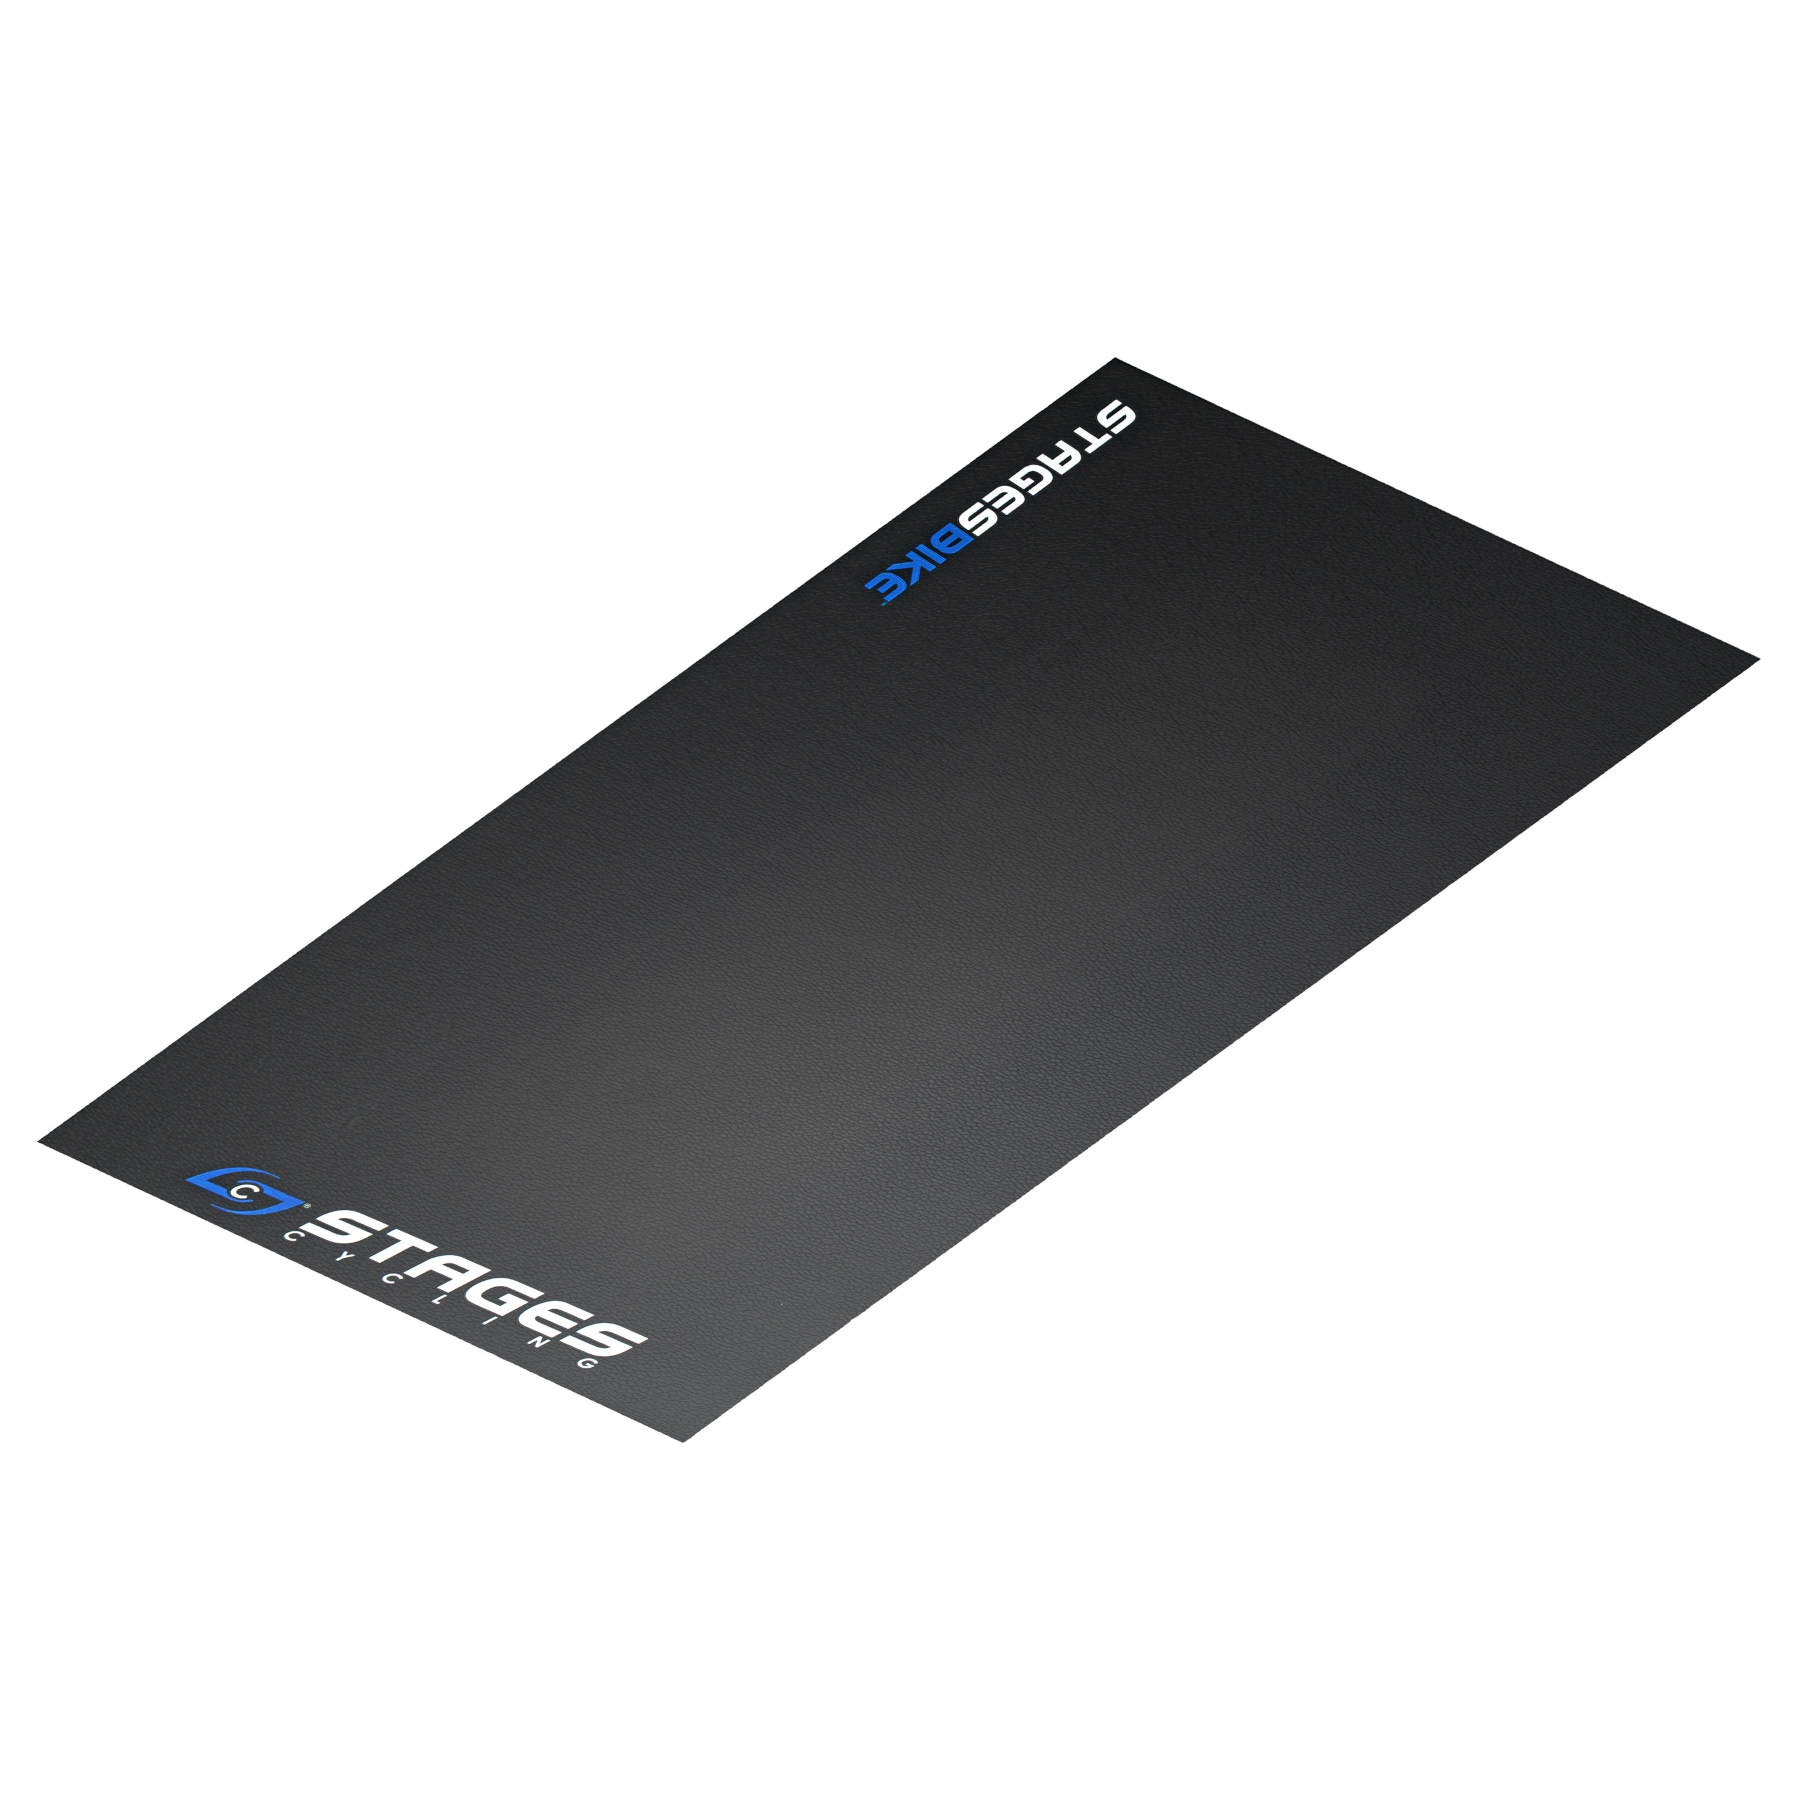 Productfoto van Stages Cycling Trainer Floor Mat